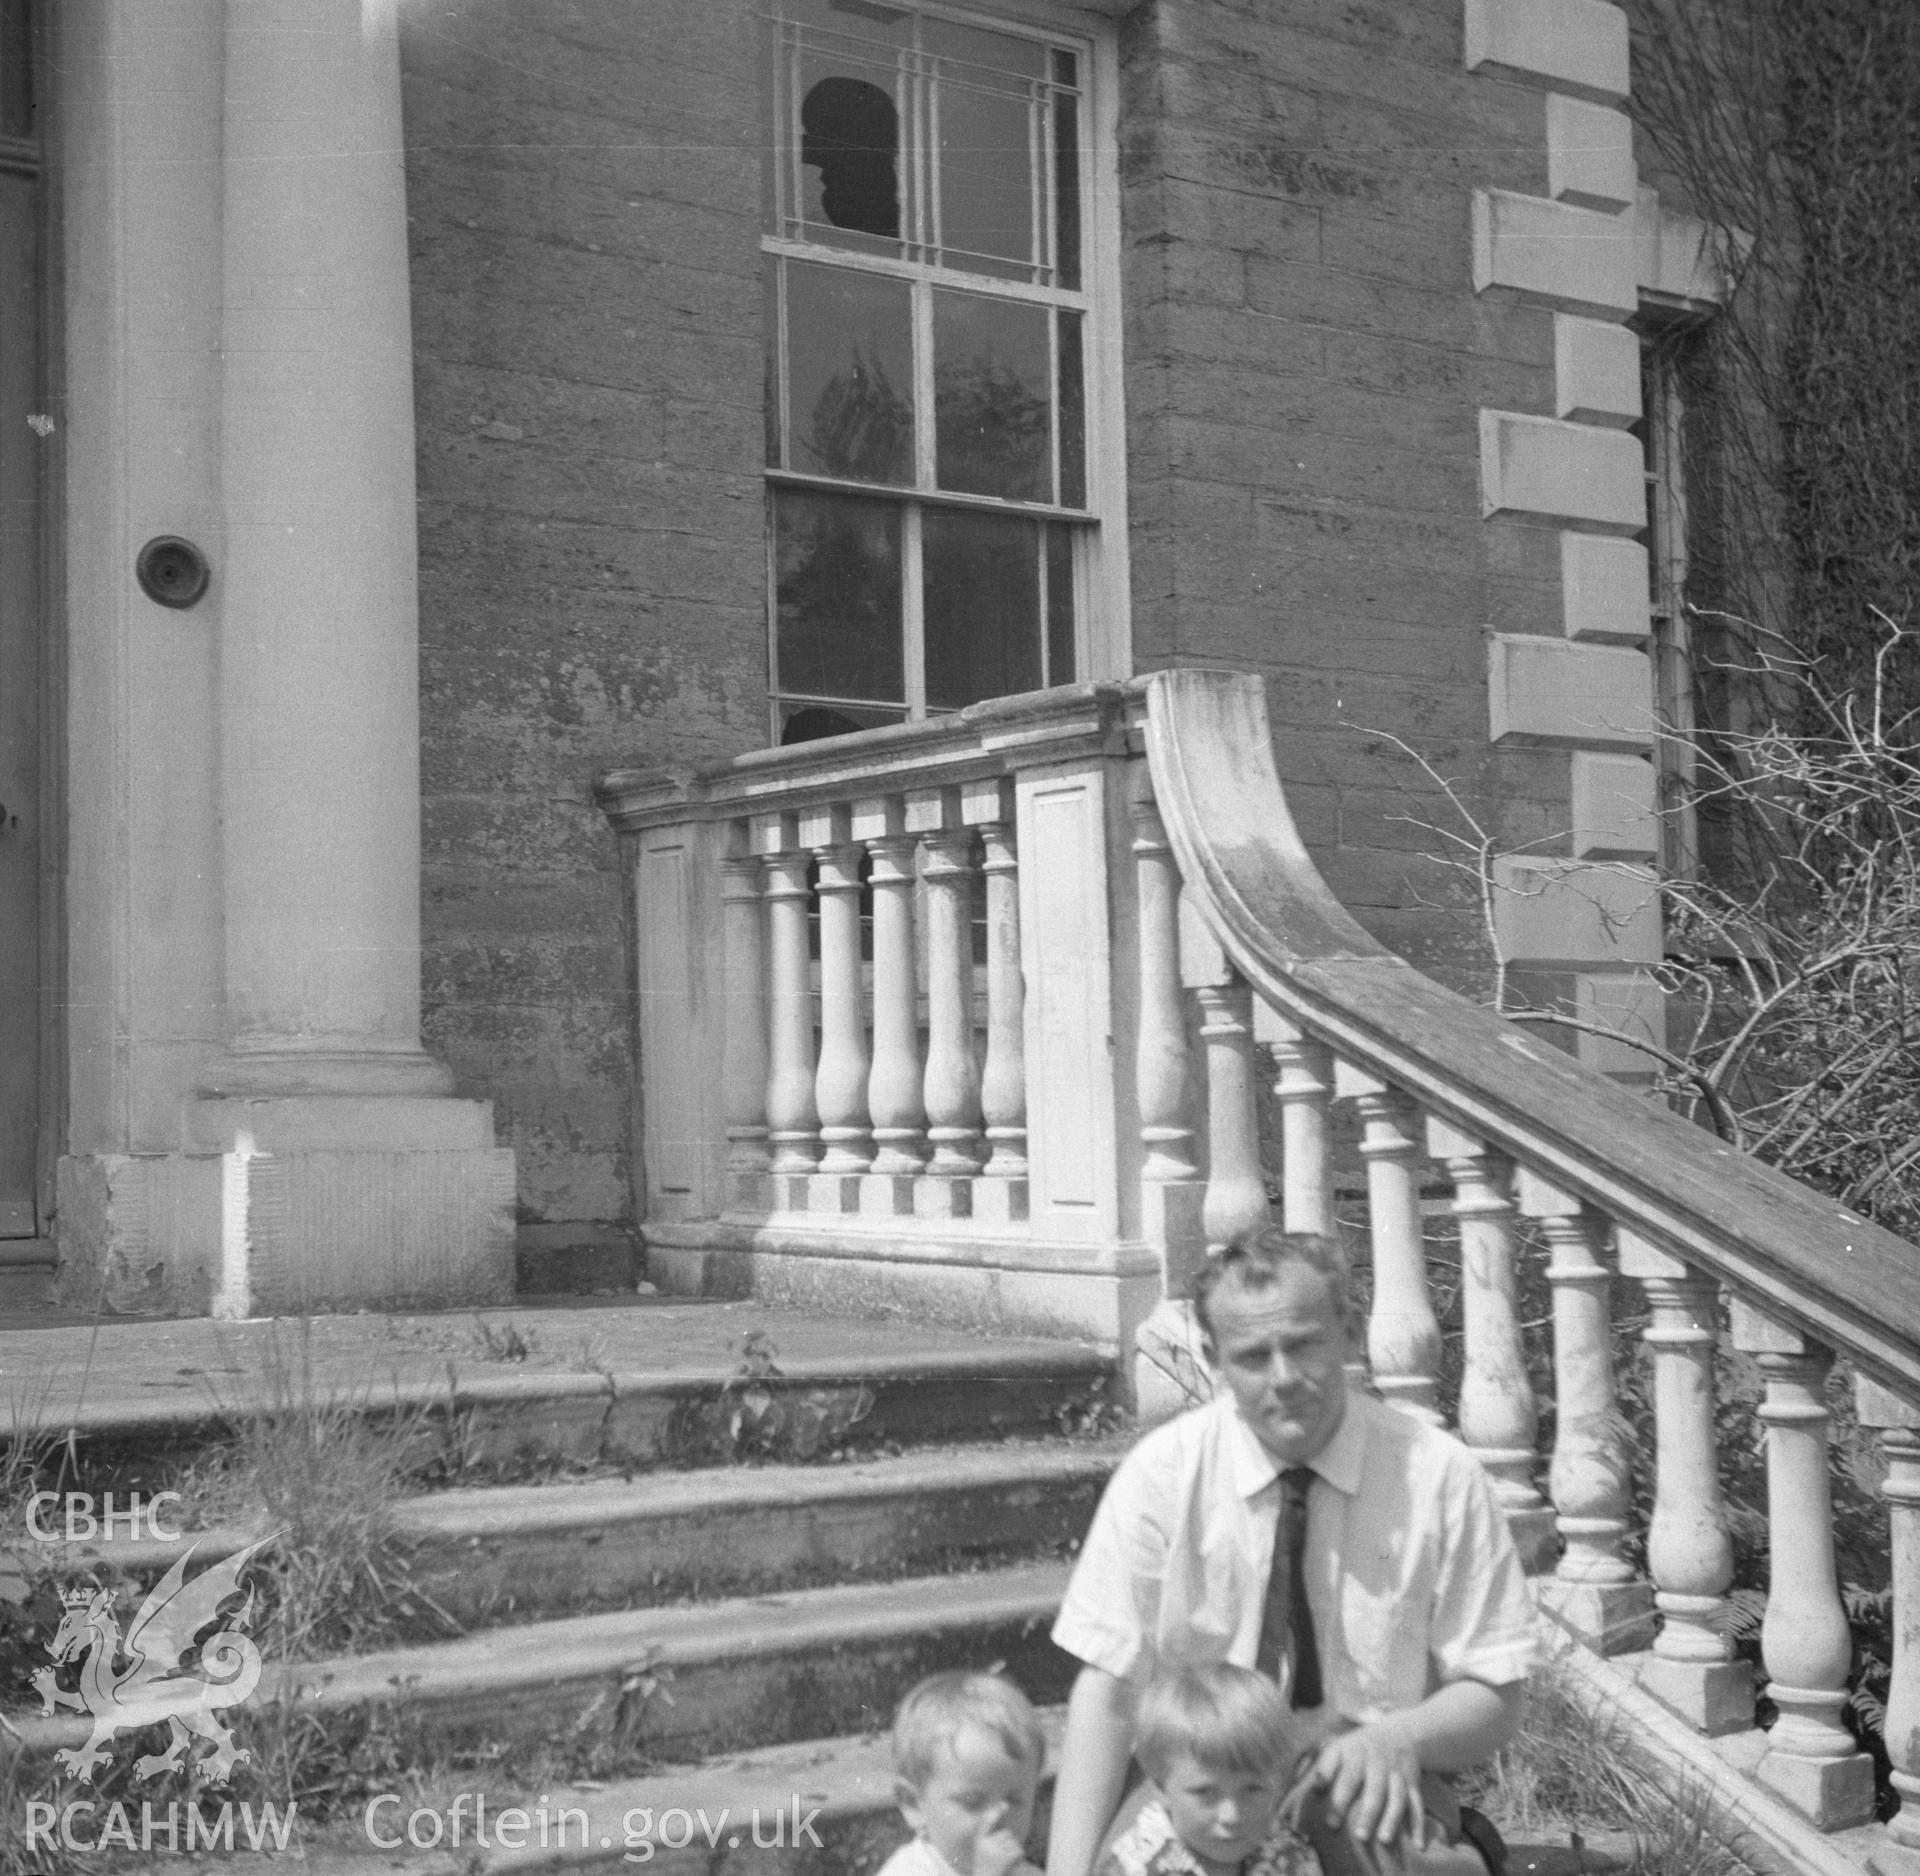 Digital copy of a black and white nitrate negative, exterior elevation of Ynysmaengwyn, with three figures sitting on the front steps.